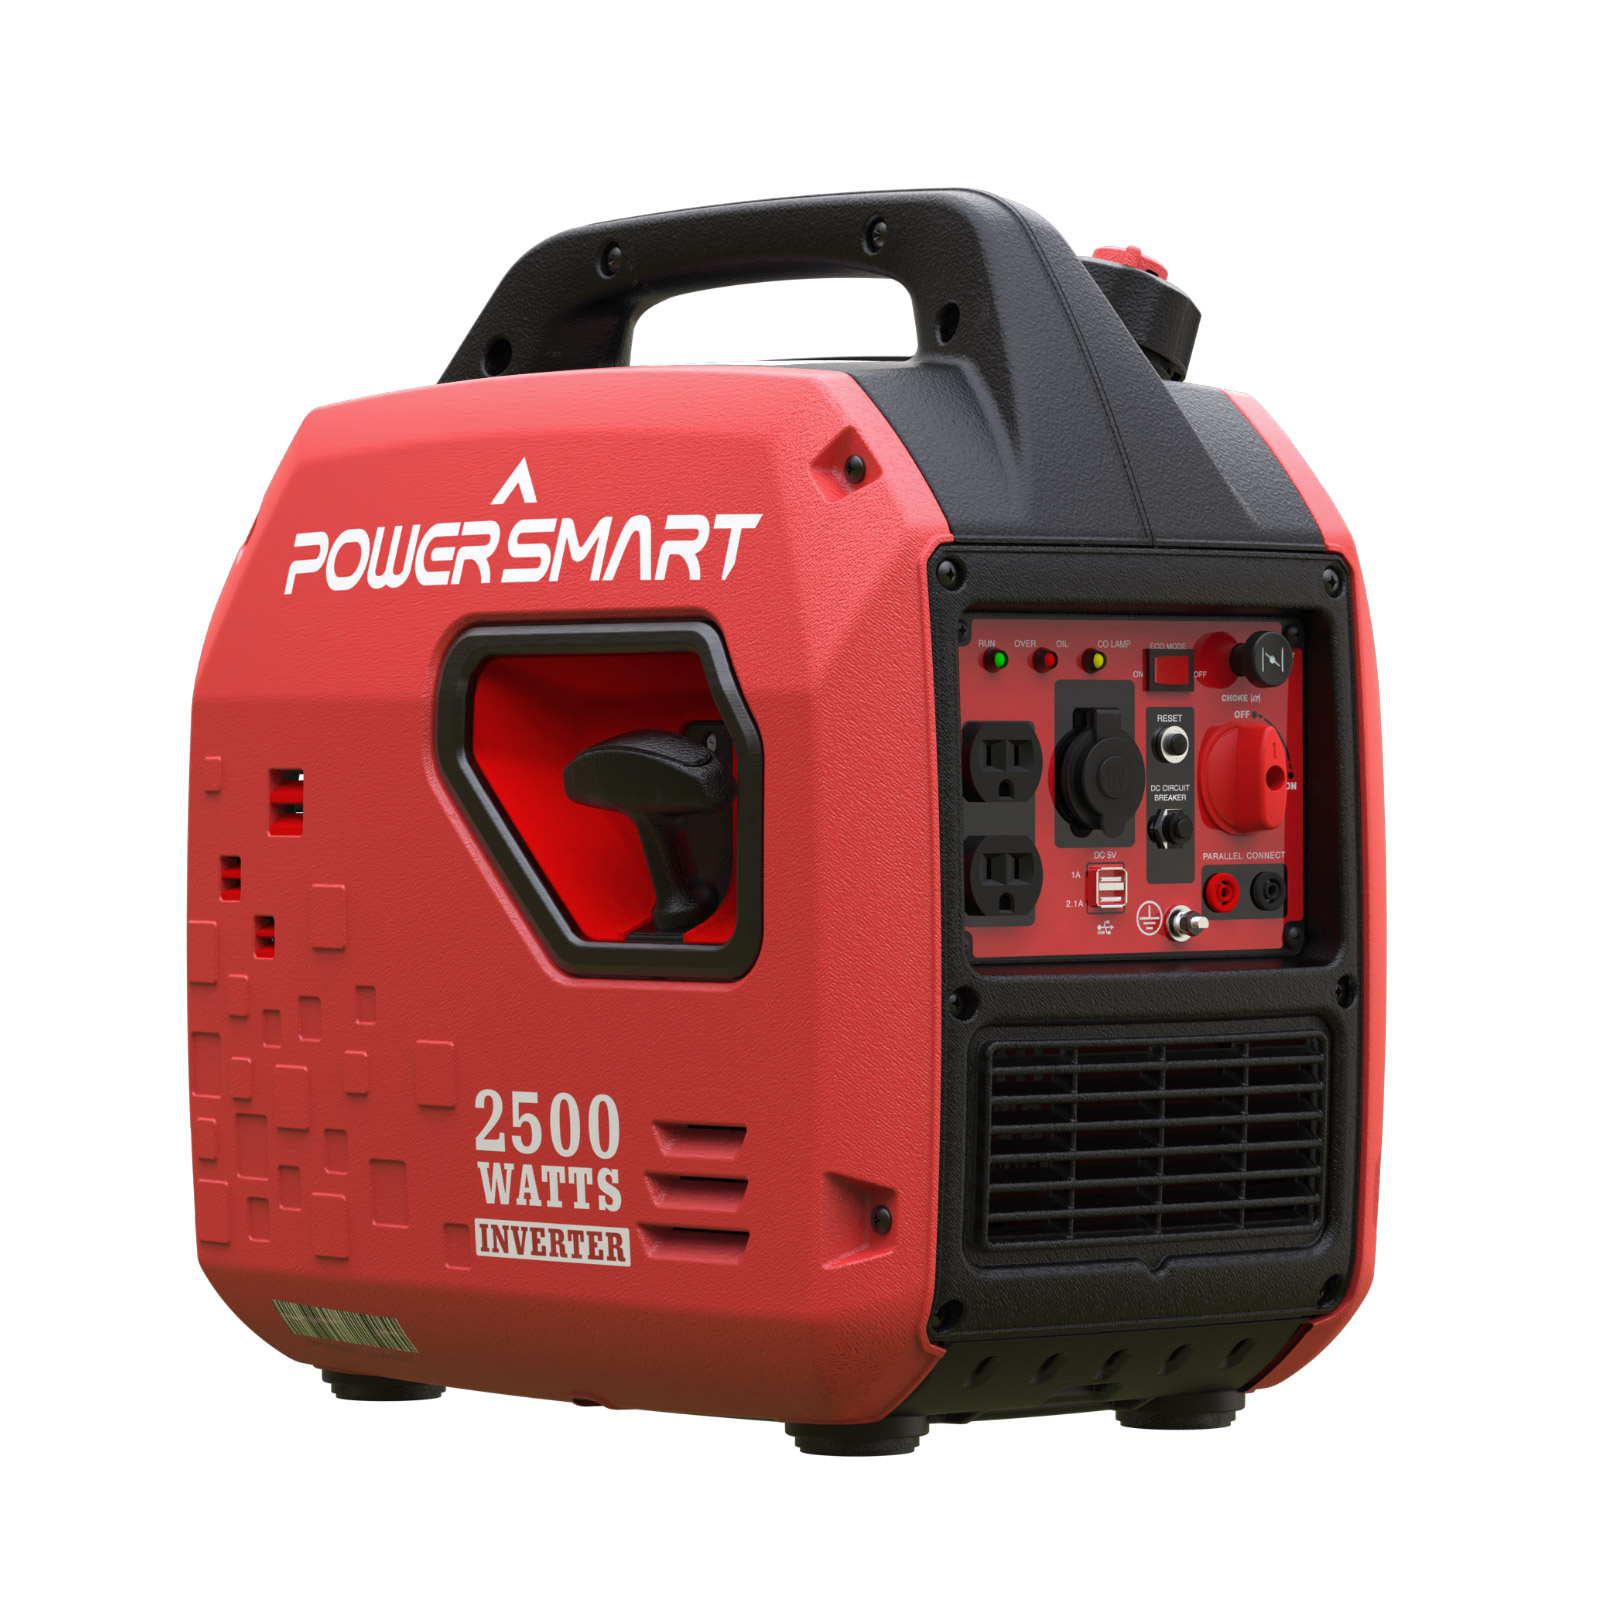 PowerSmart 2500Watt Portable Inverter Gas Powered Generator for Outdoors Camping,Low Noise - image 1 of 6